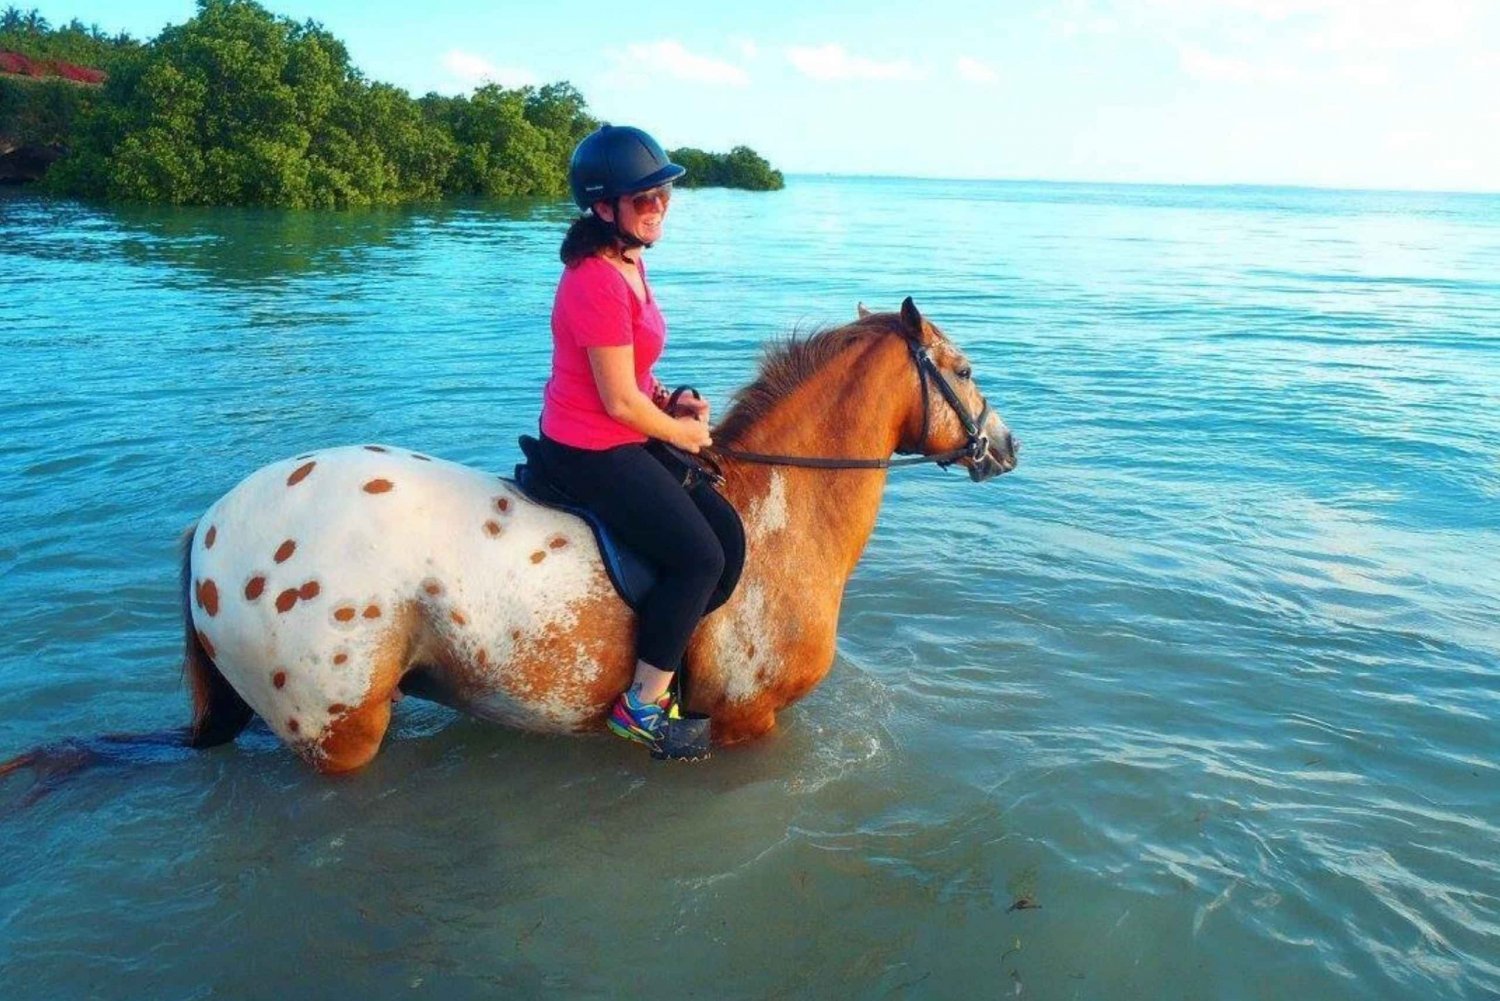 Zanzibar: Private Full-Day Highlights Tour with Horse Riding